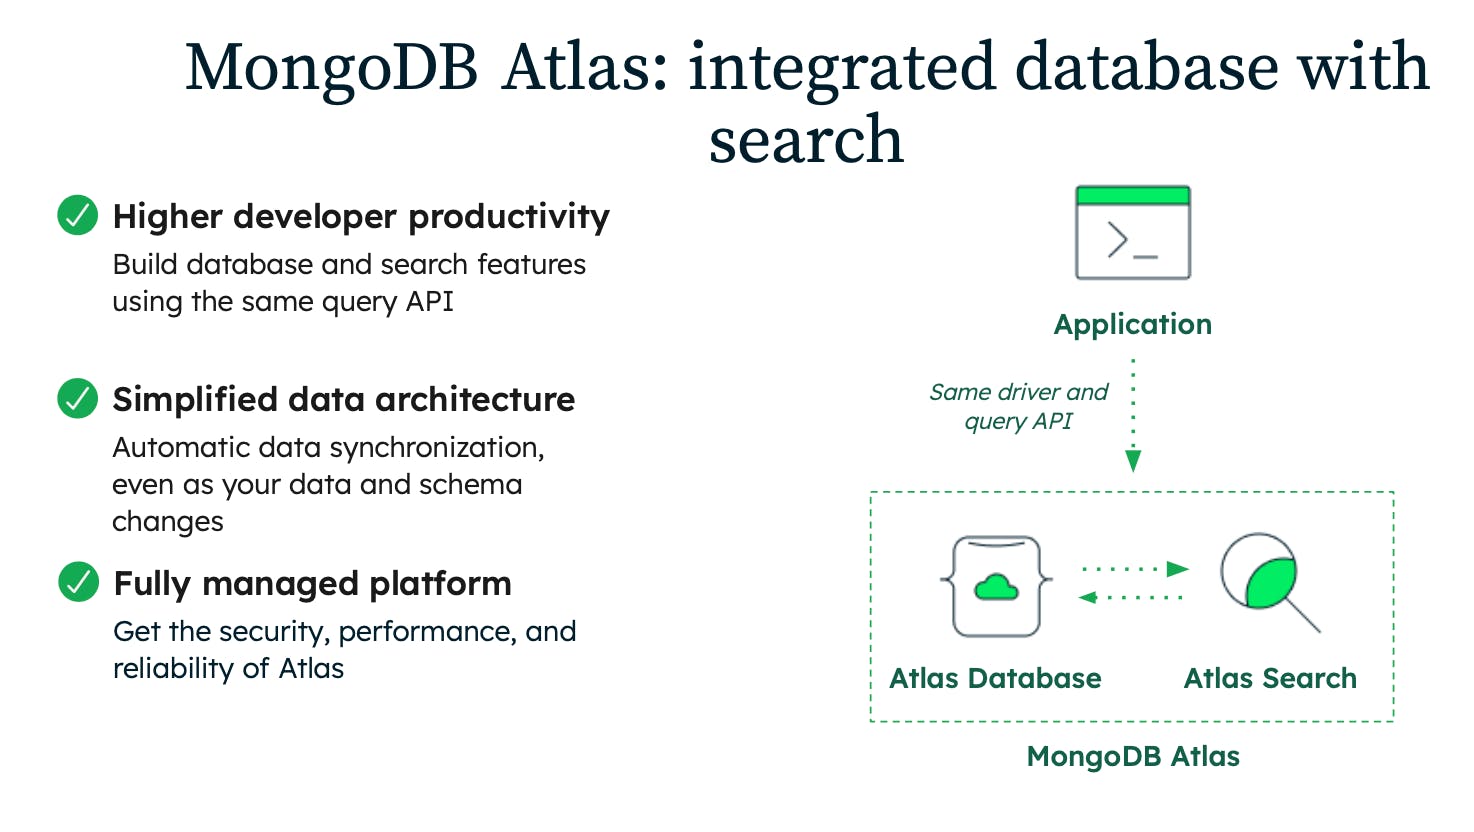 Atlas Search provides a fully-integrated full-text search engine, automatically synchronized with your database